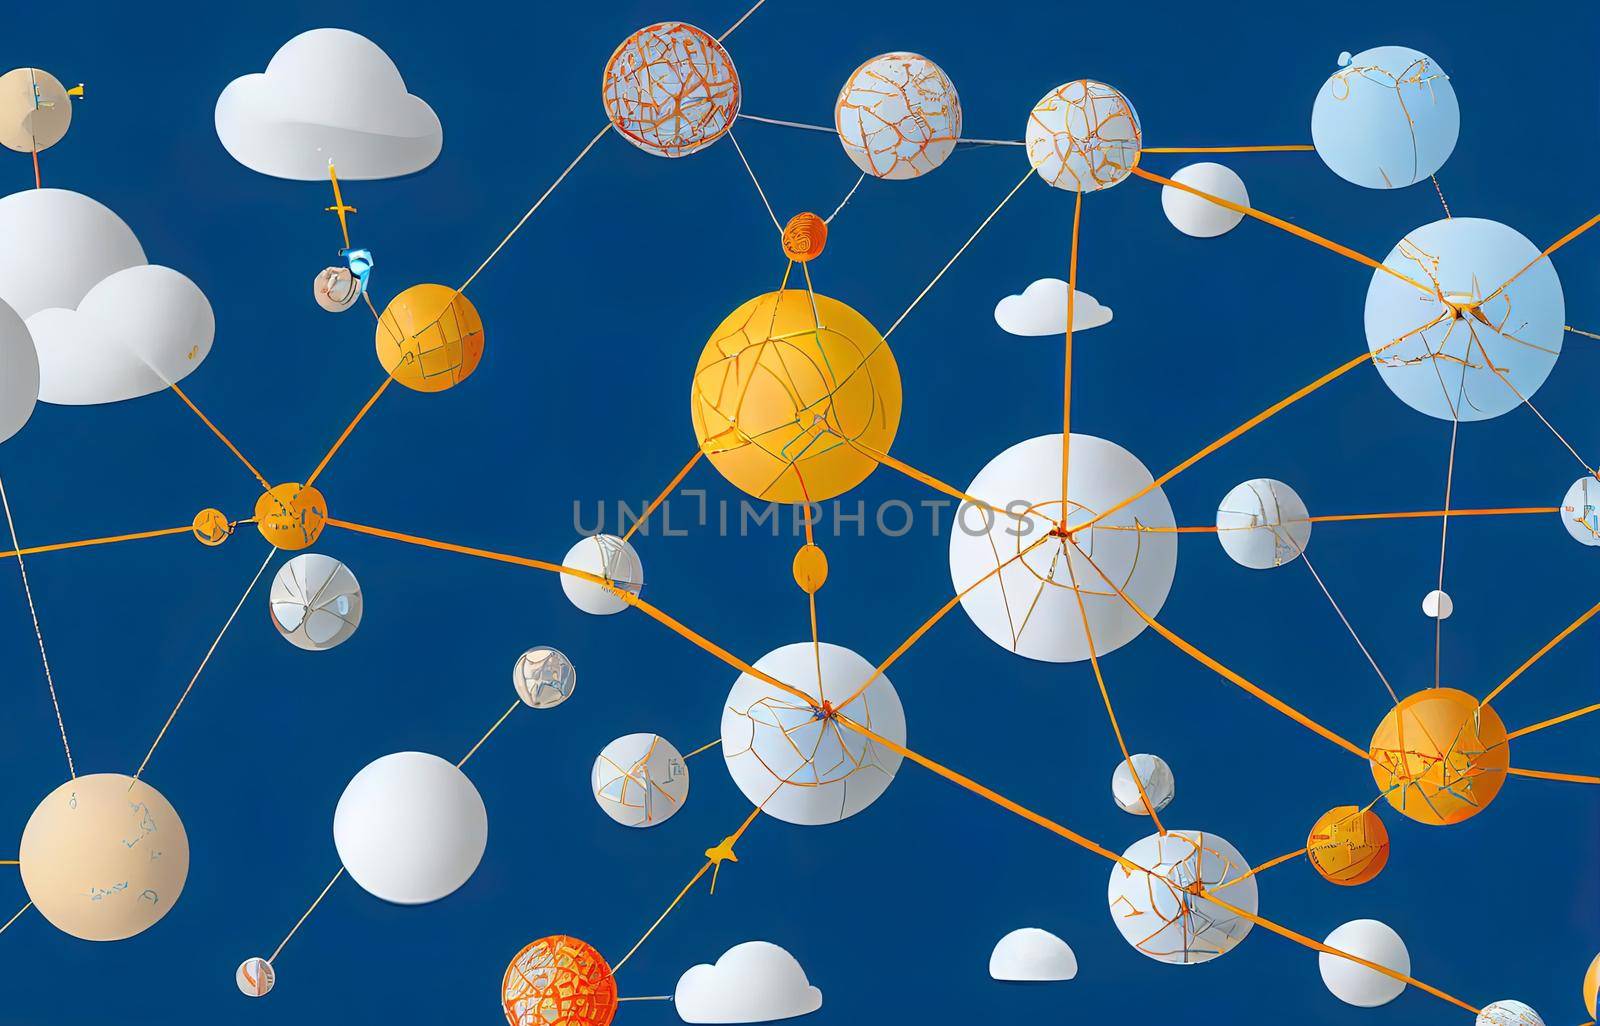 Animation of network of connections and white people icons interacting over cityscape with clouds on blue sky in the background. Global network connections and social networking concept.